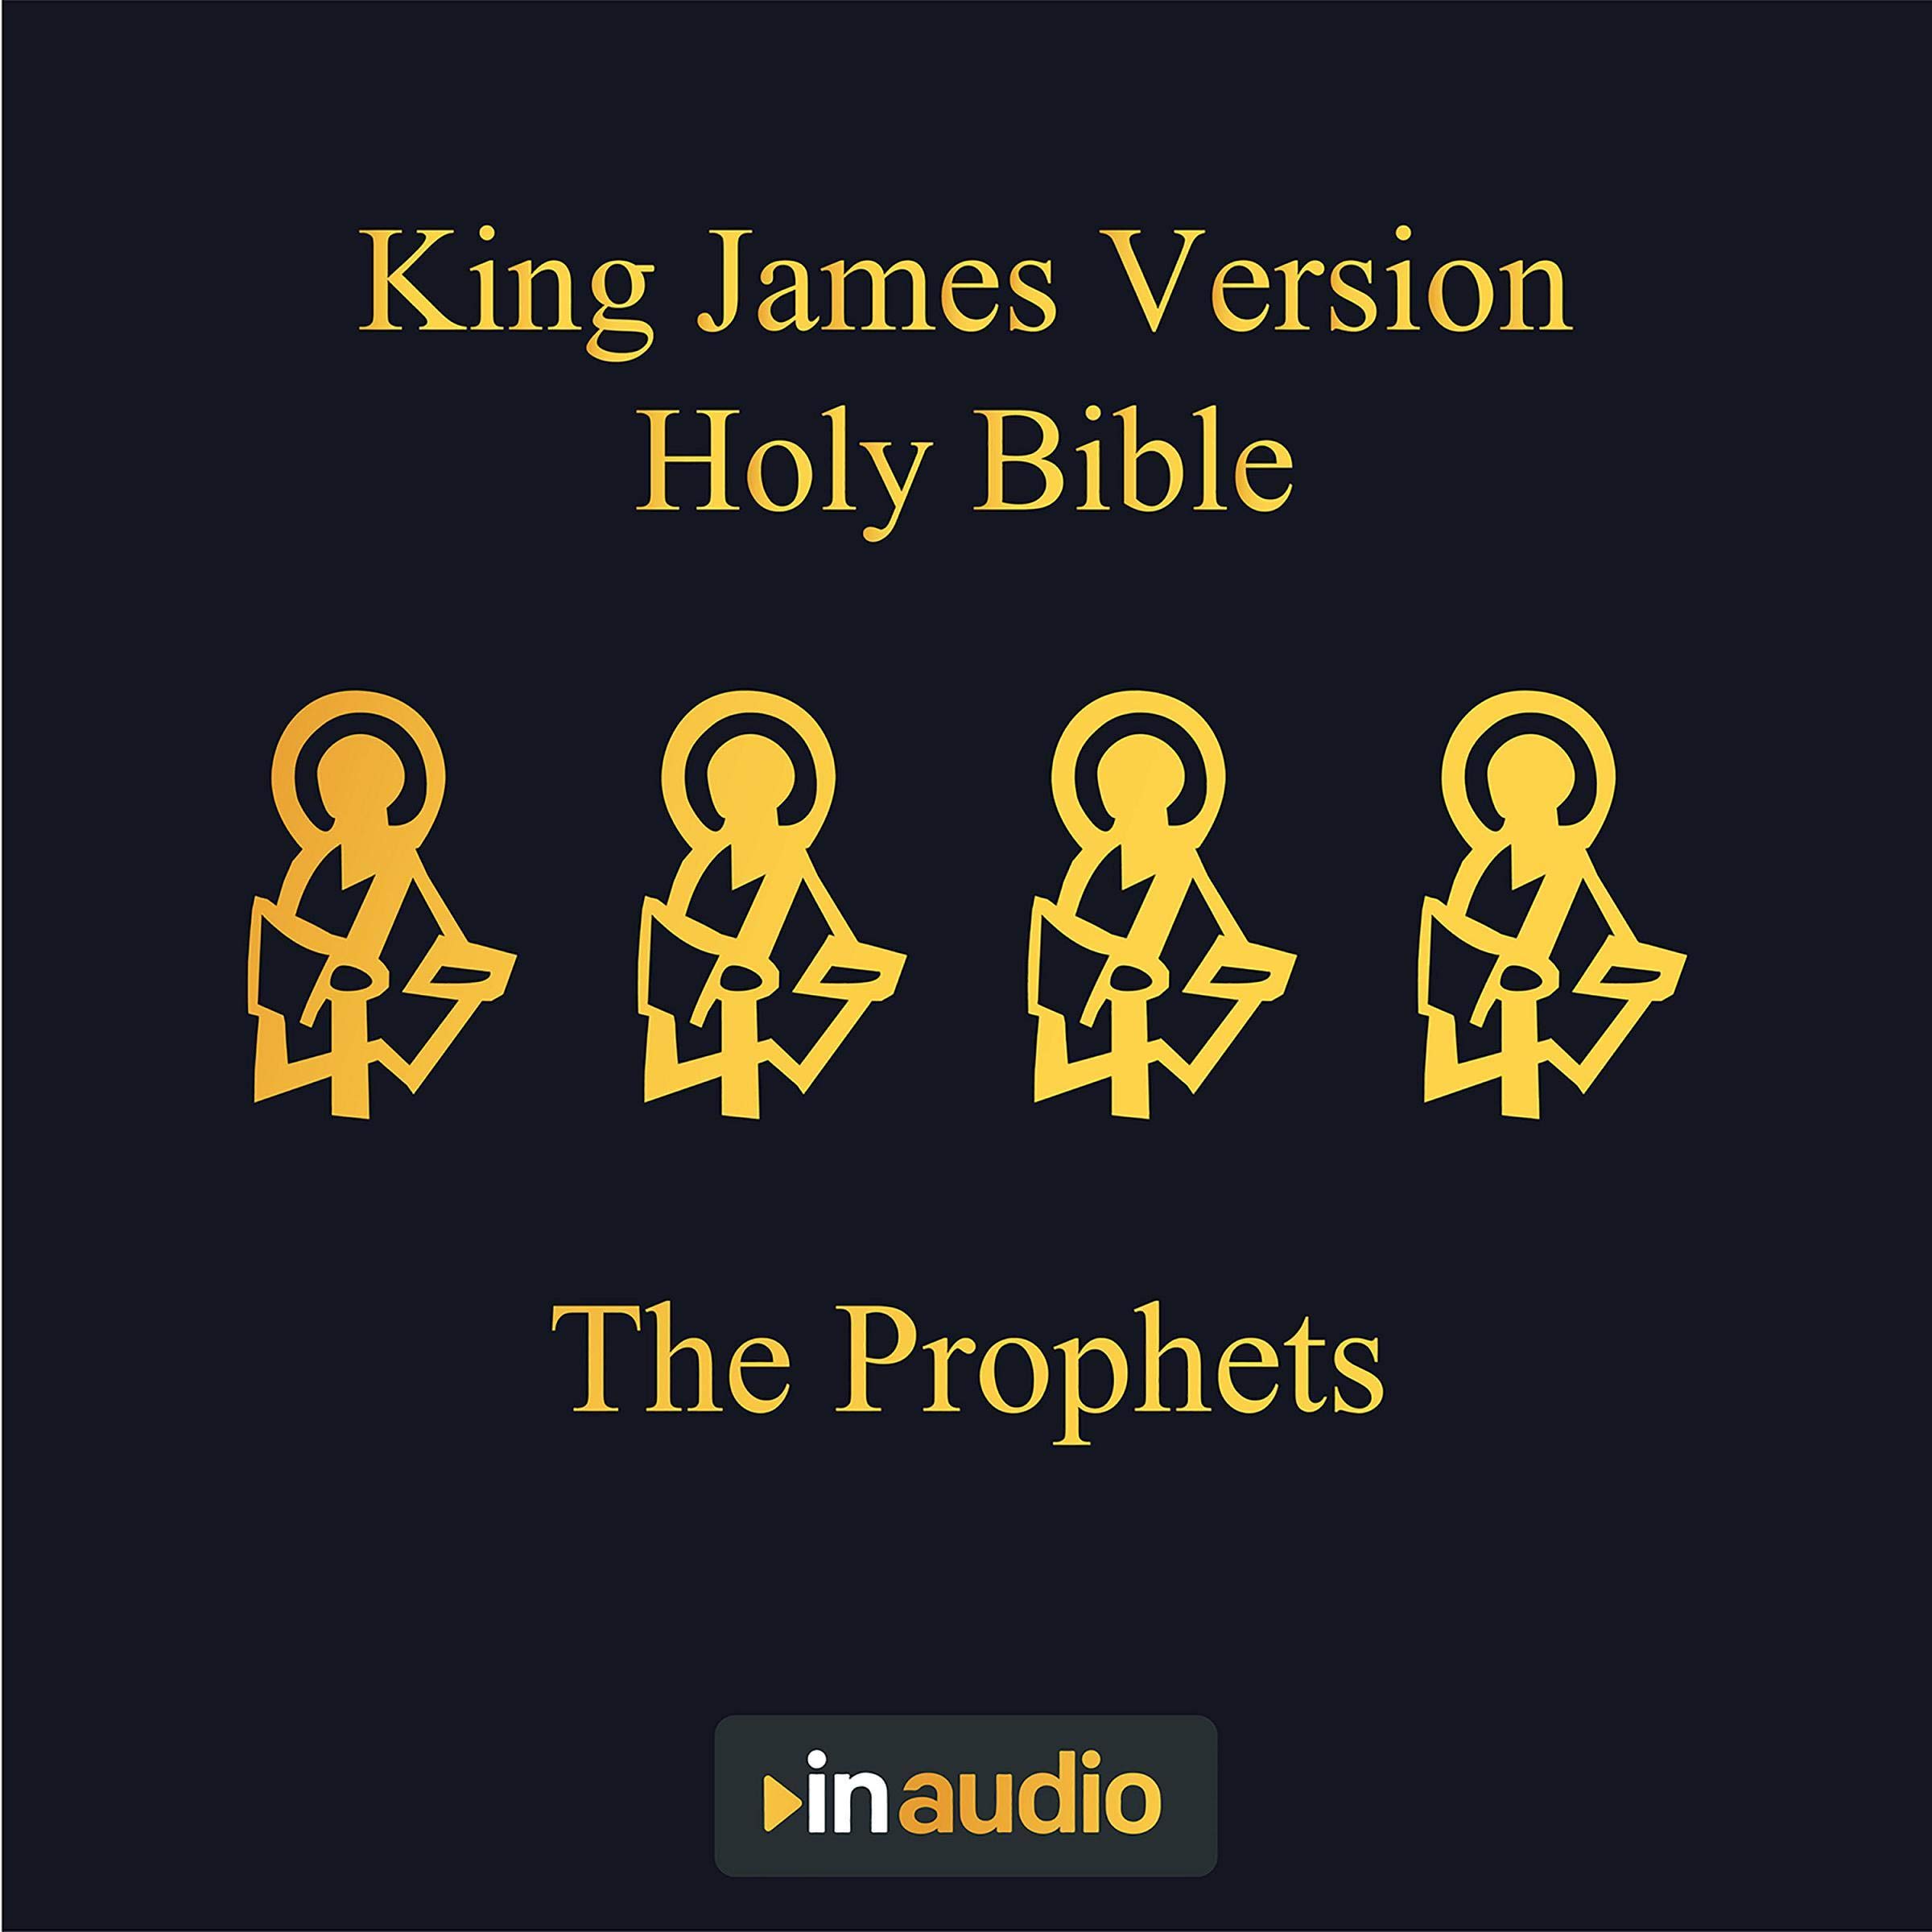 King James Version Holy Bible - The Prophets